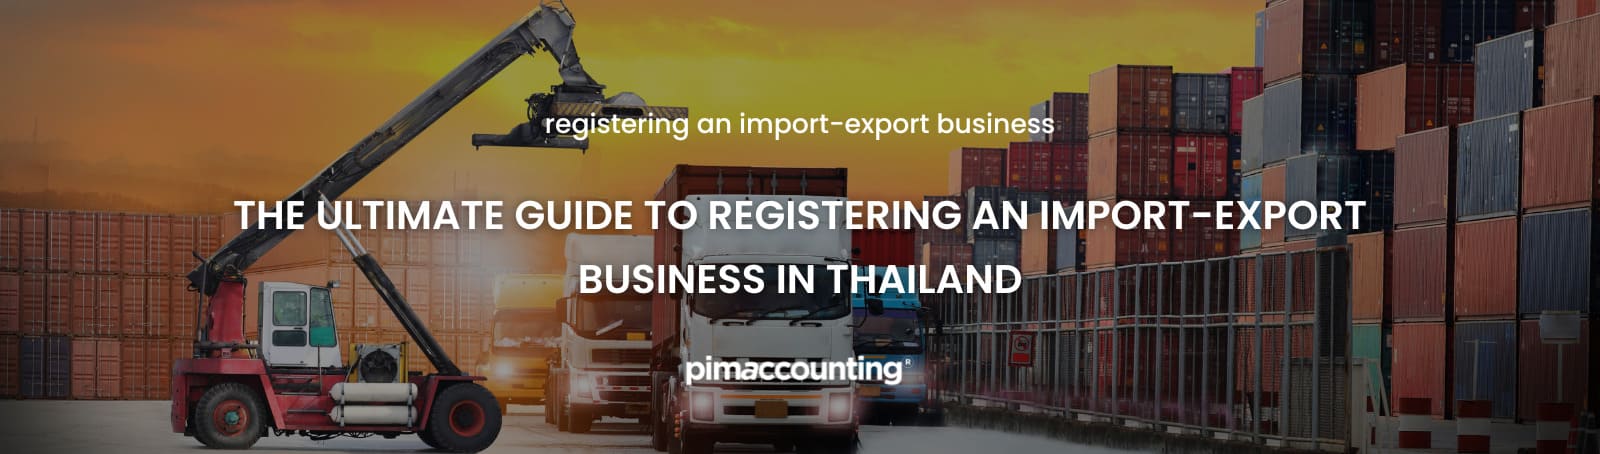 The Ultimate Guide to Registering an Import-export Business in Thailand - Pimaccounting